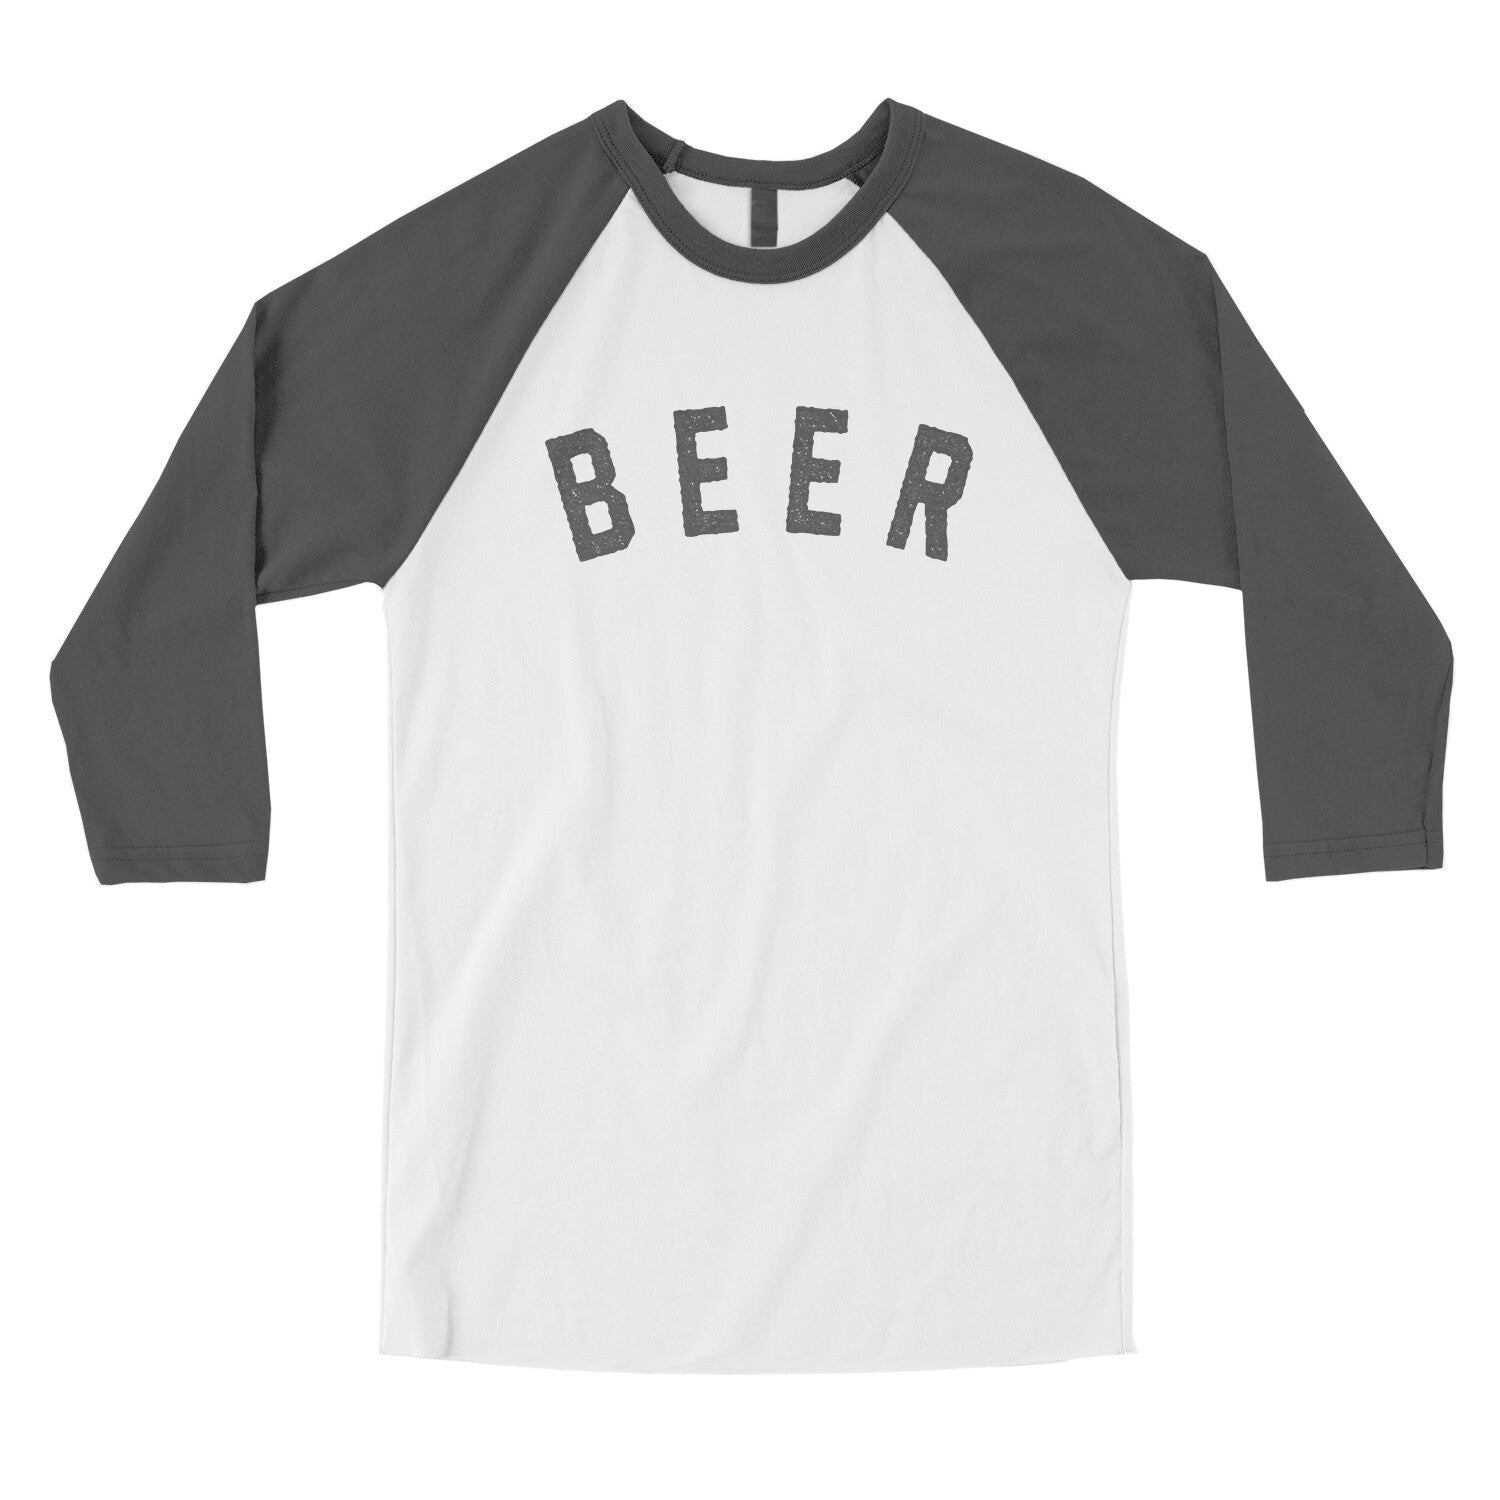 Beer in White with Asphalt Color